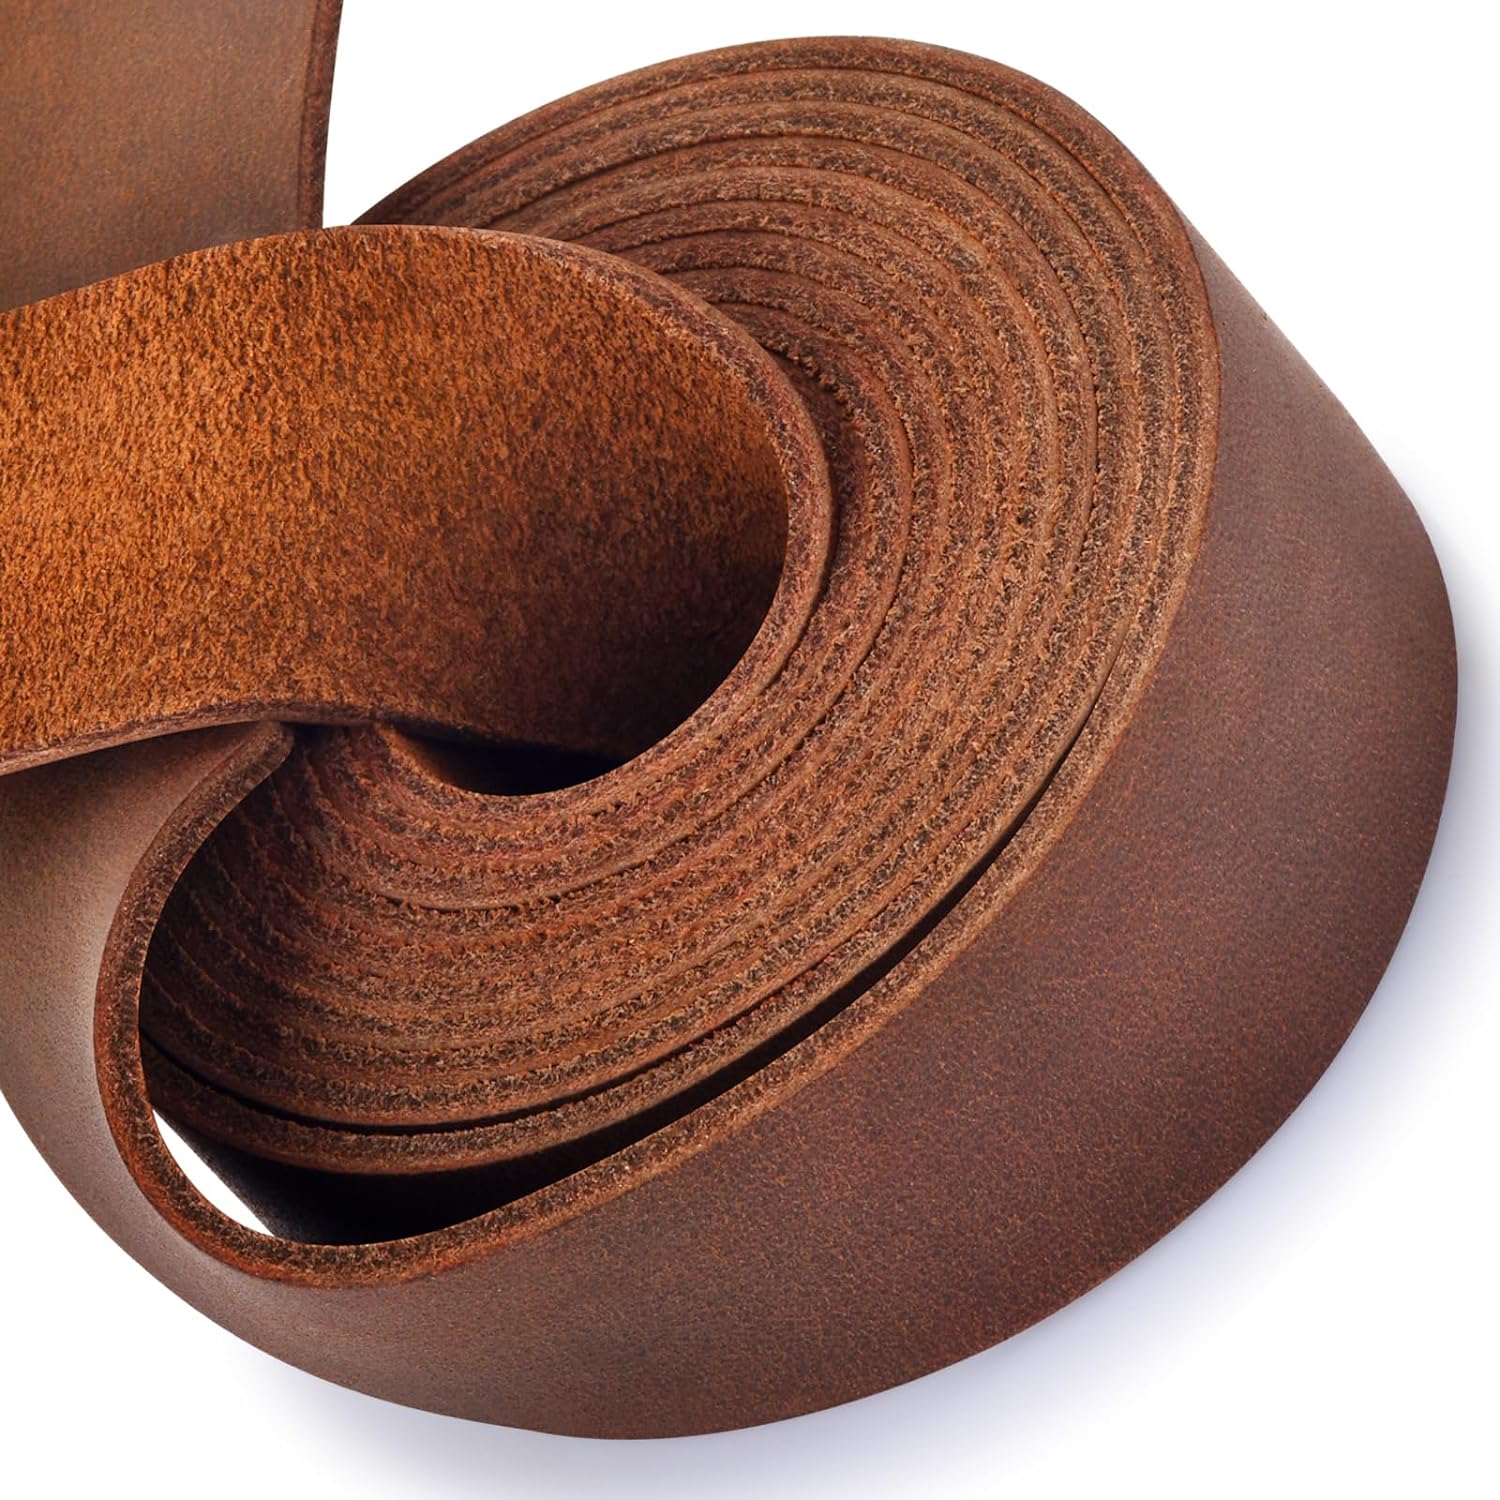 TOFL Leather Strap | 72 Inches Long | 1/2 Inch Wide | 1 Leather Strip